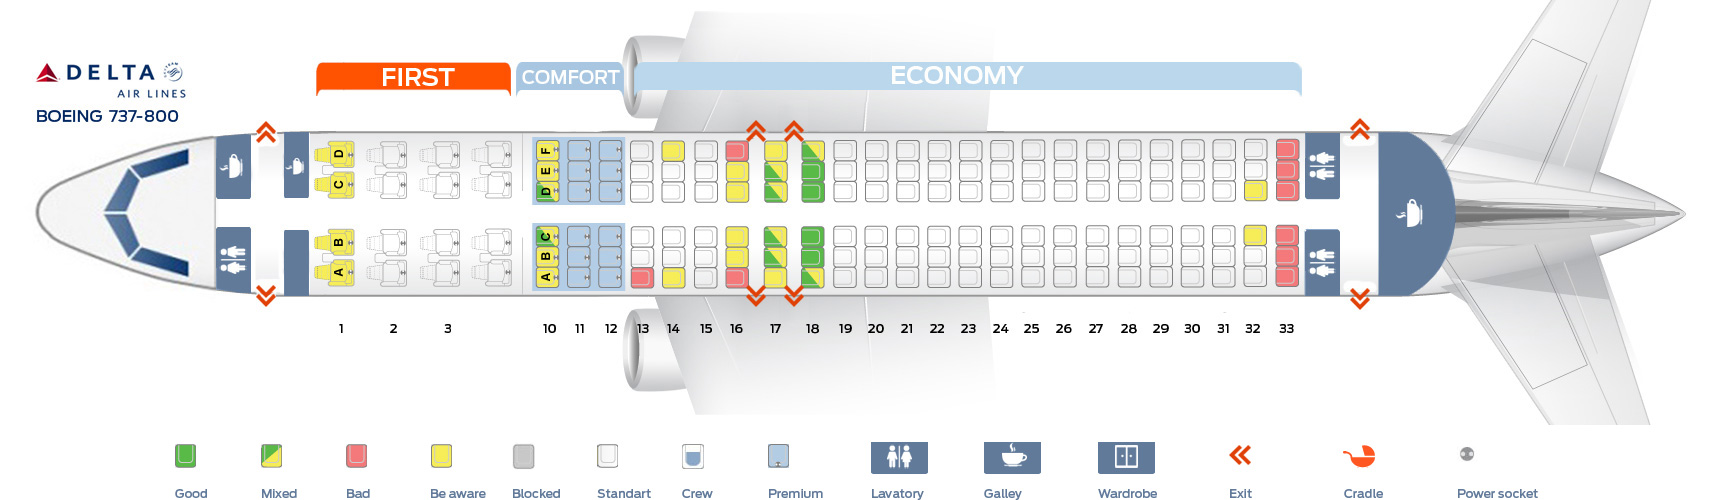 Seat map Boeing 737-800 Delta Airlines. Best seats in plane